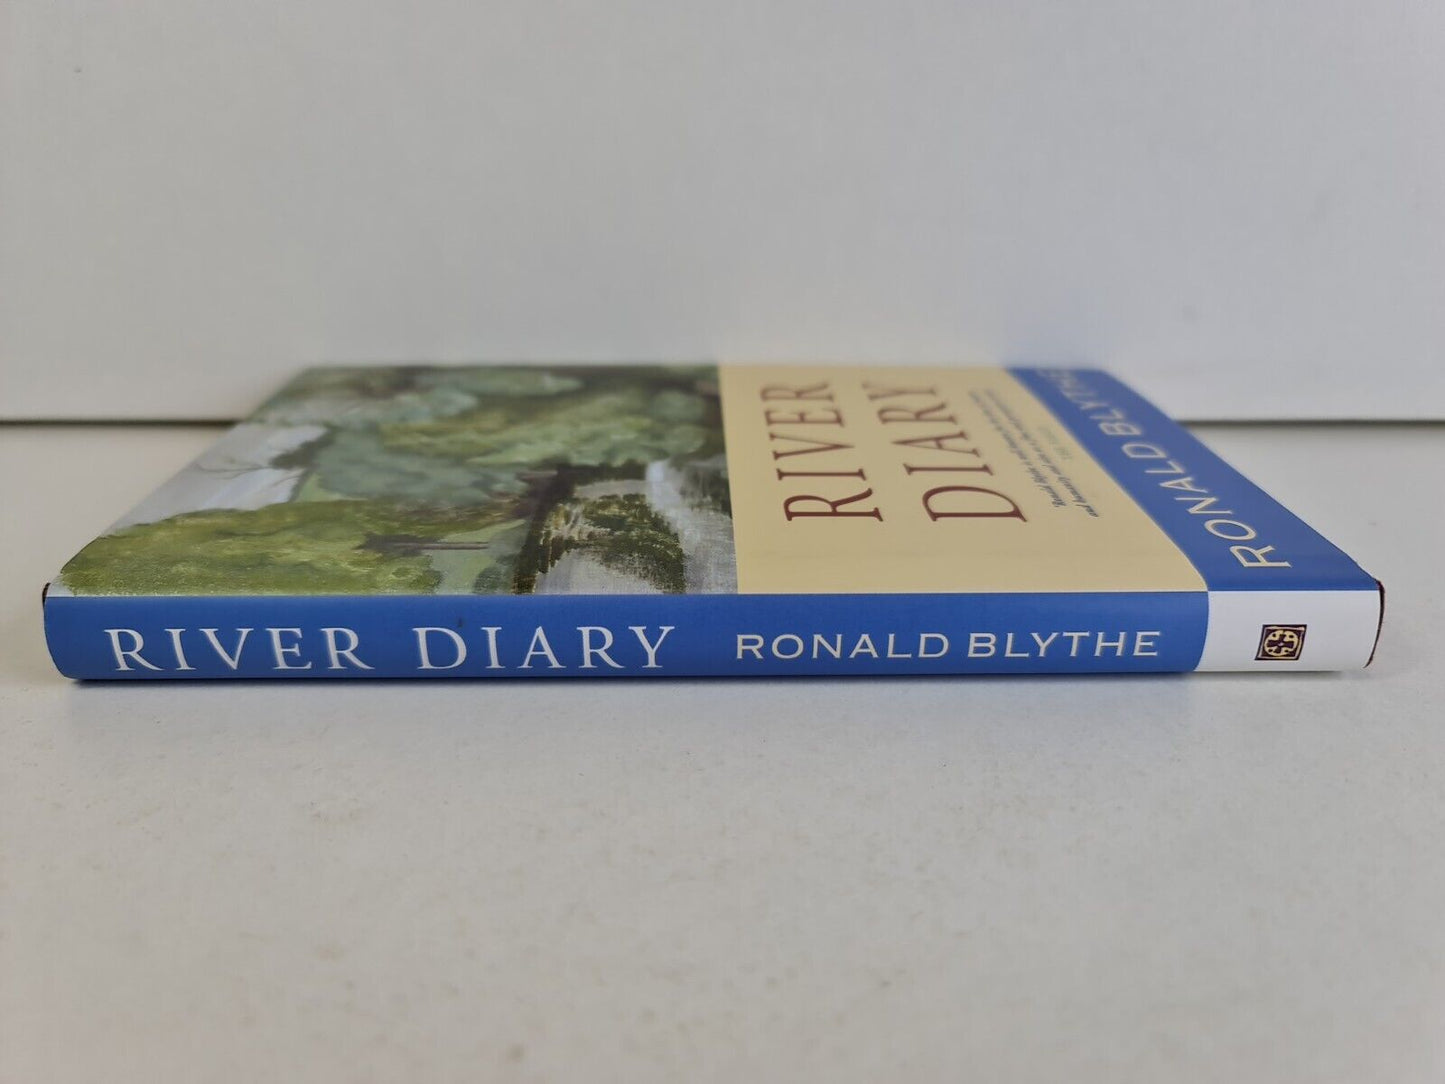 River Diary by Ronald Blythe (2008)